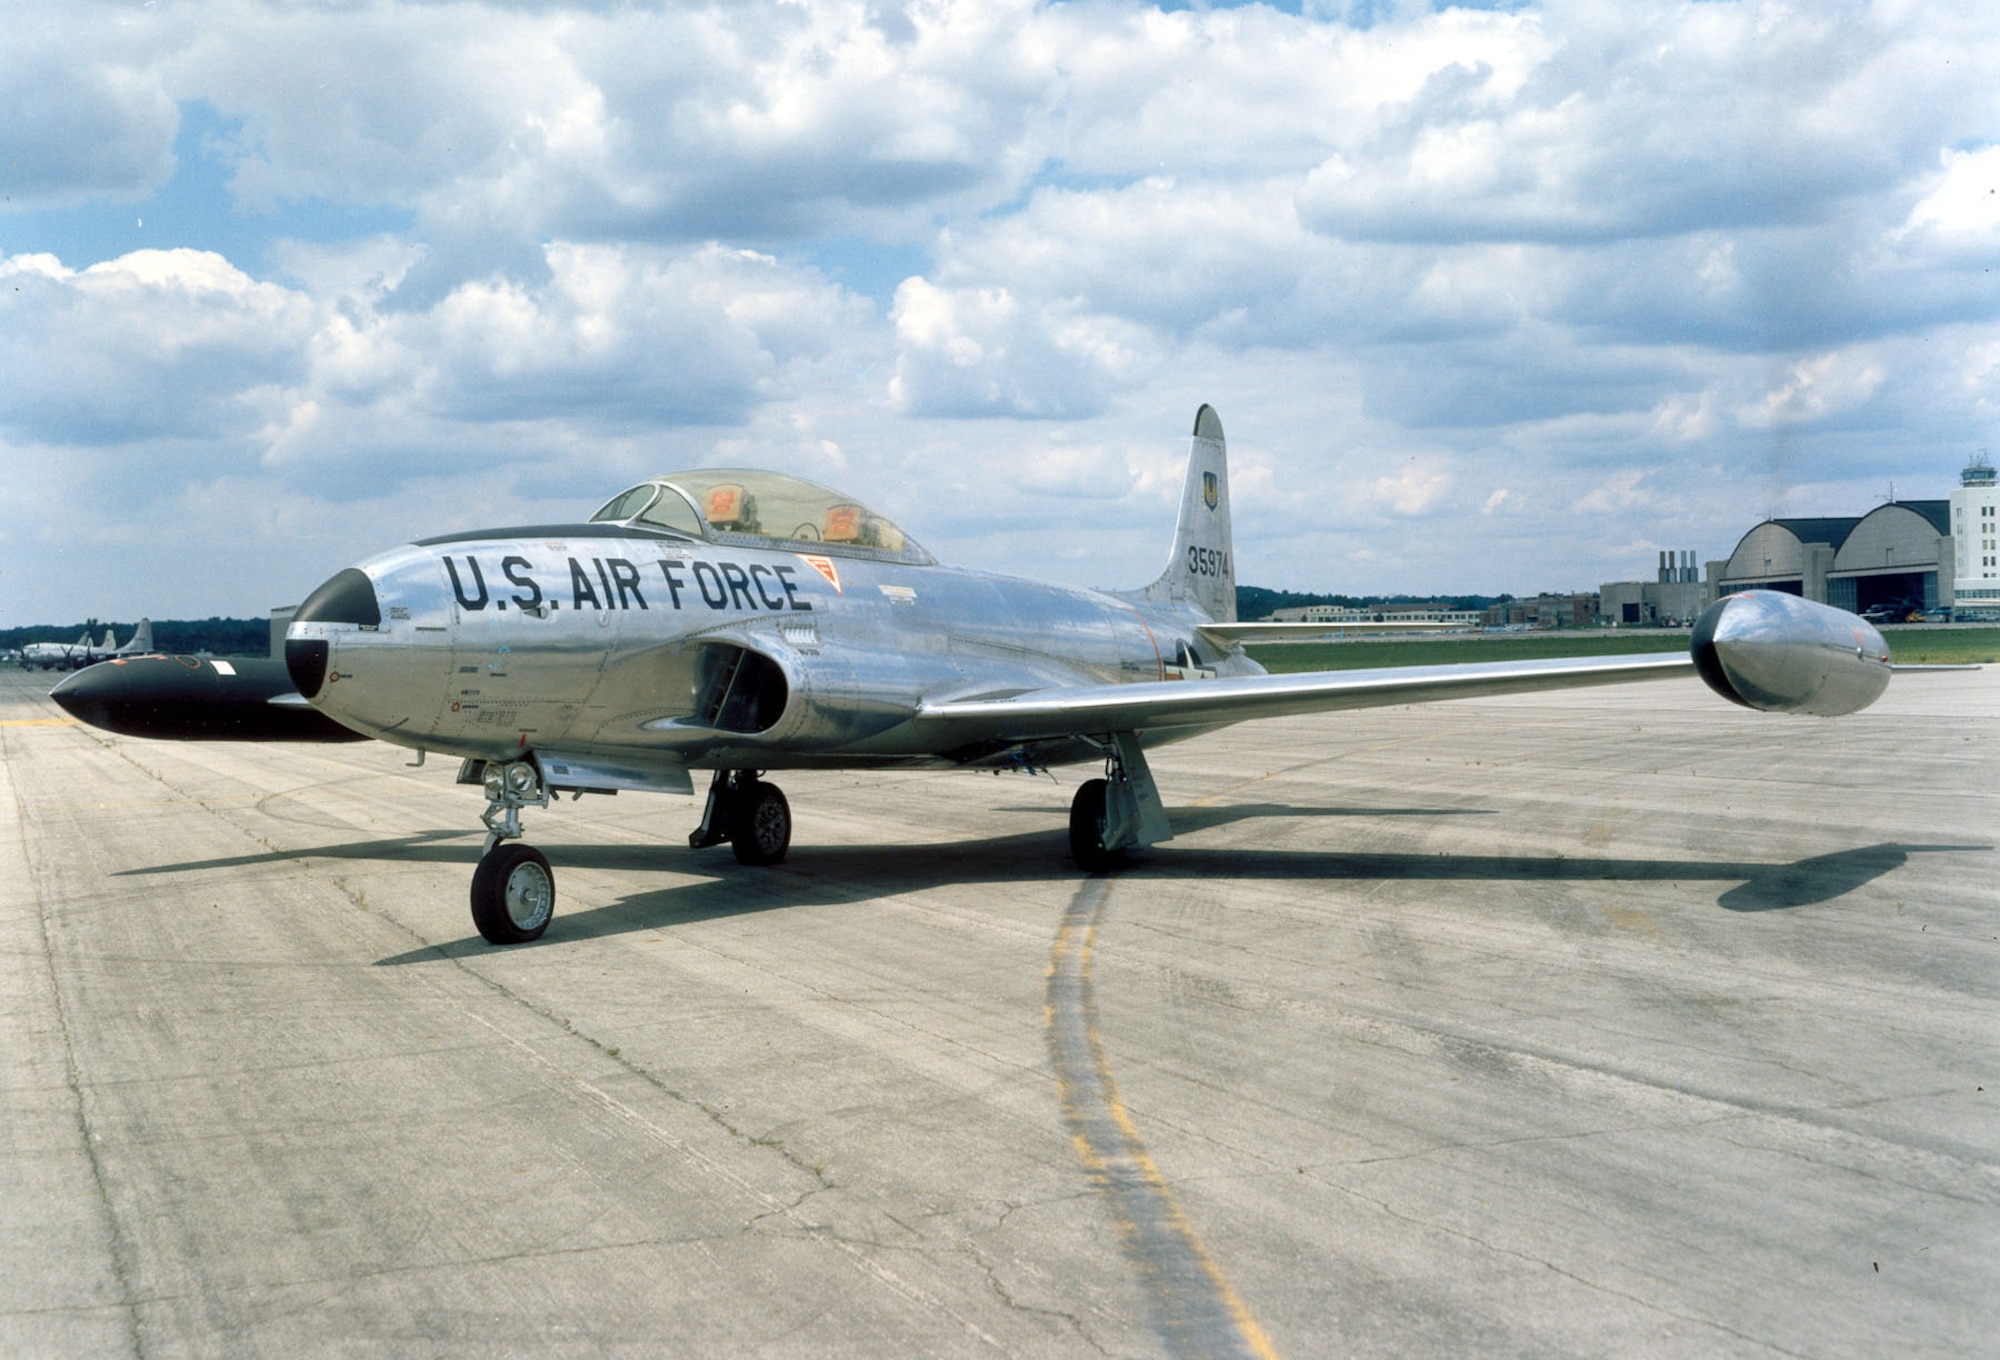 DAYTON, Ohio -- Lockheed T-33A Shooting Star at the National Museum of the United States Air Force. (U.S. Air Force photo)